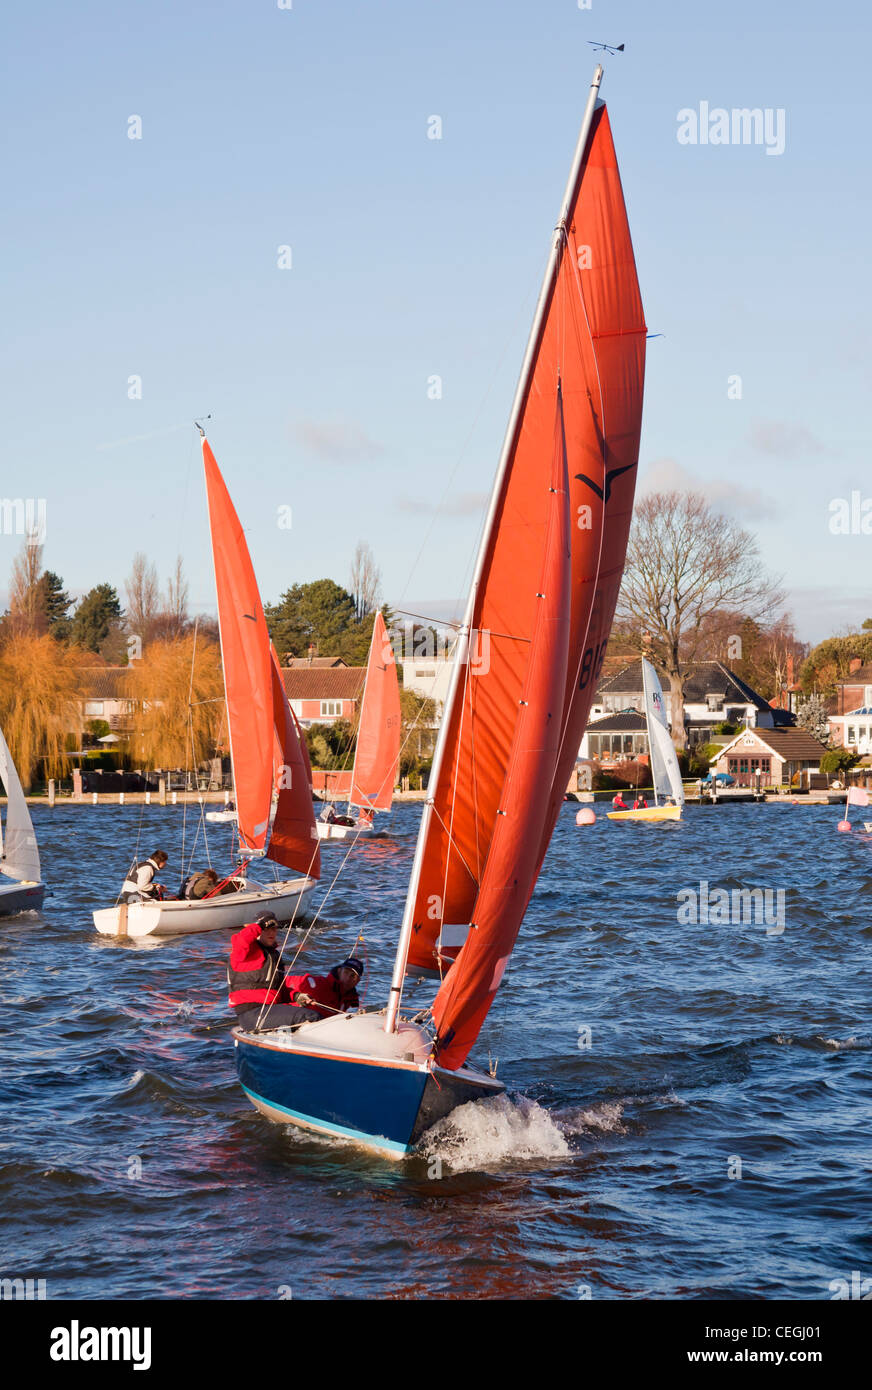 Sailing dinghy racing on Oulton broad. Stock Photo